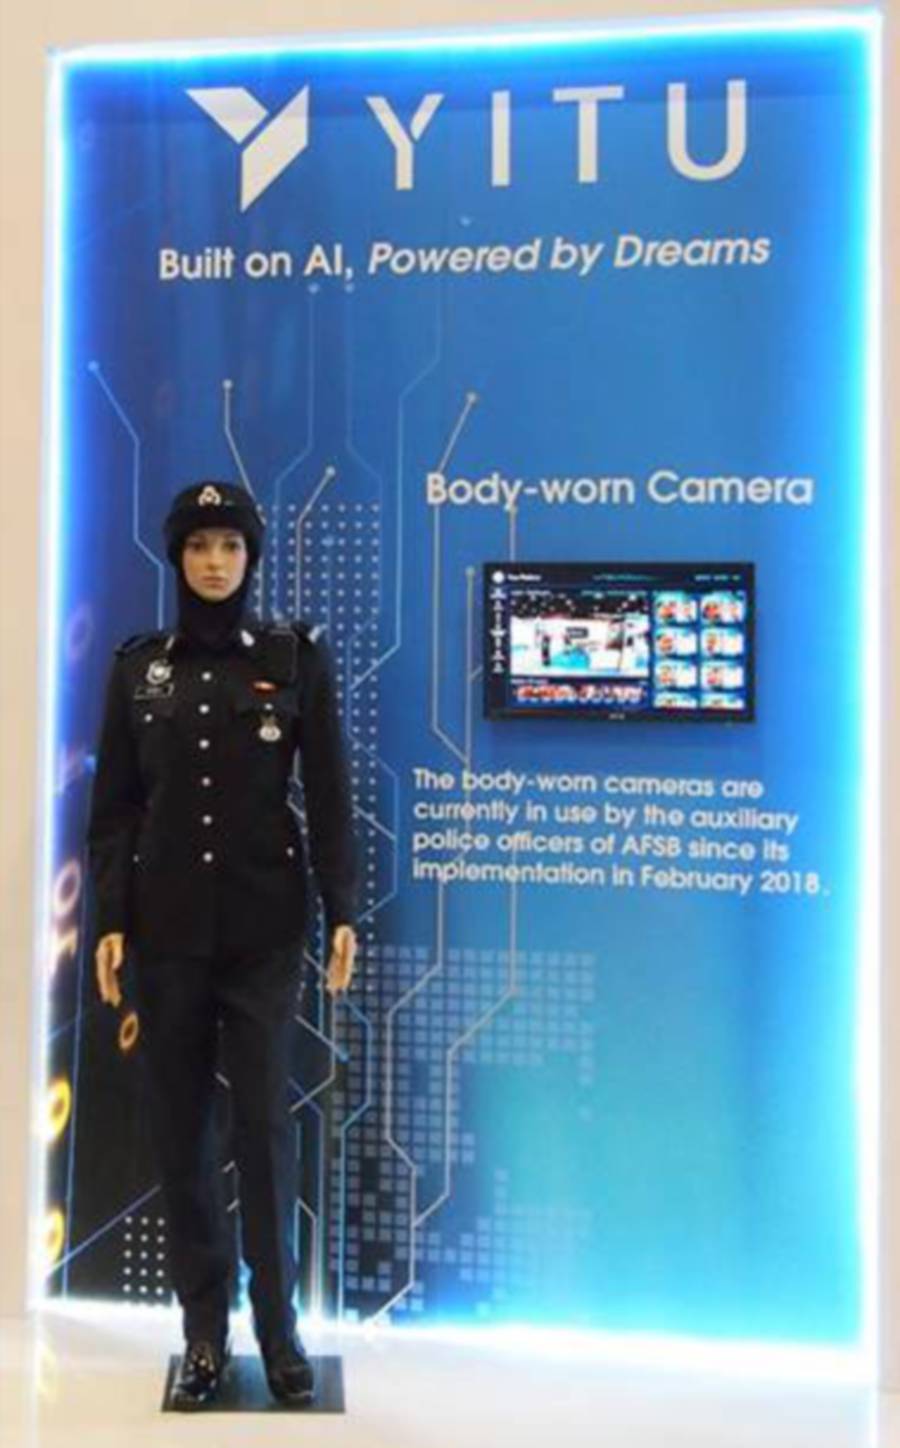 AFSB’s body-worn camera system is on display during National Security Asia (NATSEC) 2018 at Malaysia International Trade & Exhibition Centre (MITEC) from 16 to 19 April 2018.